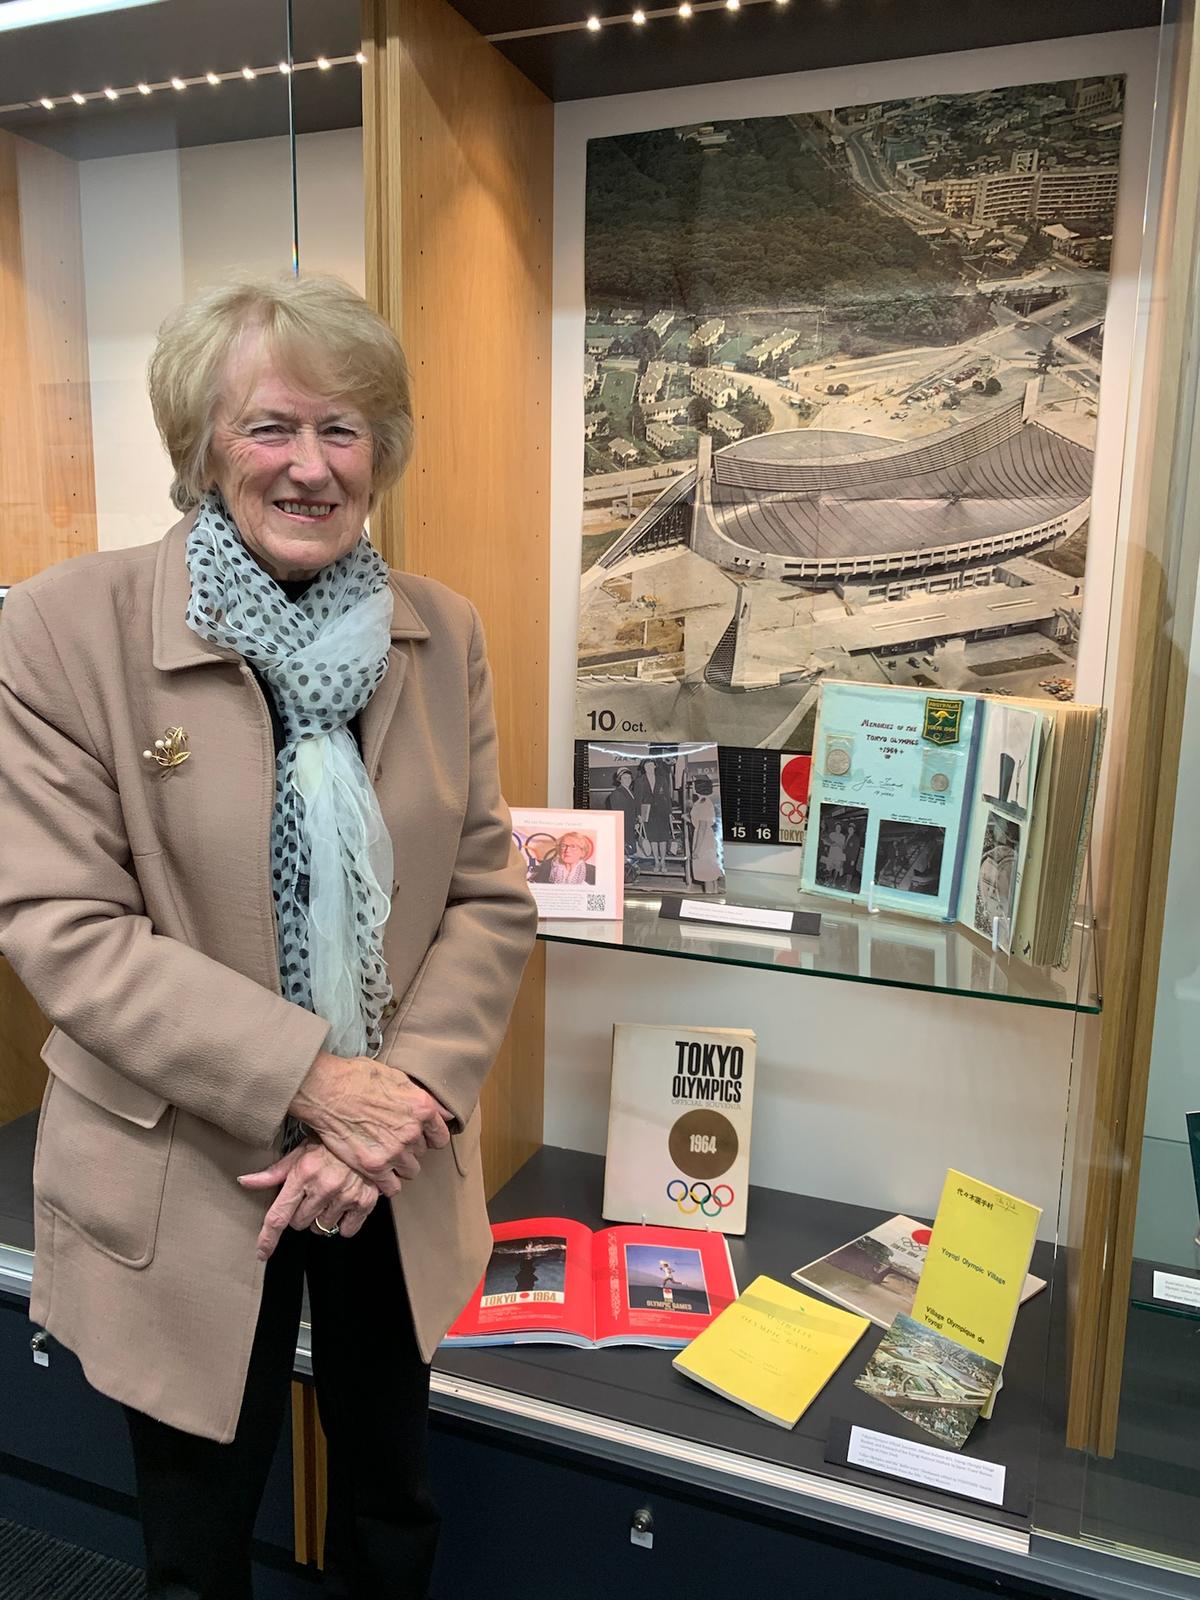 Jan Becker visiting the "Memories of Tokyo 1964" exhibition at the Consulate-General of Japan in Melbourne, Australia, on May 19, 2021. Items such as her scrapbook and commemorative stamps are currently on display. (Courtesy of Jan Becker)